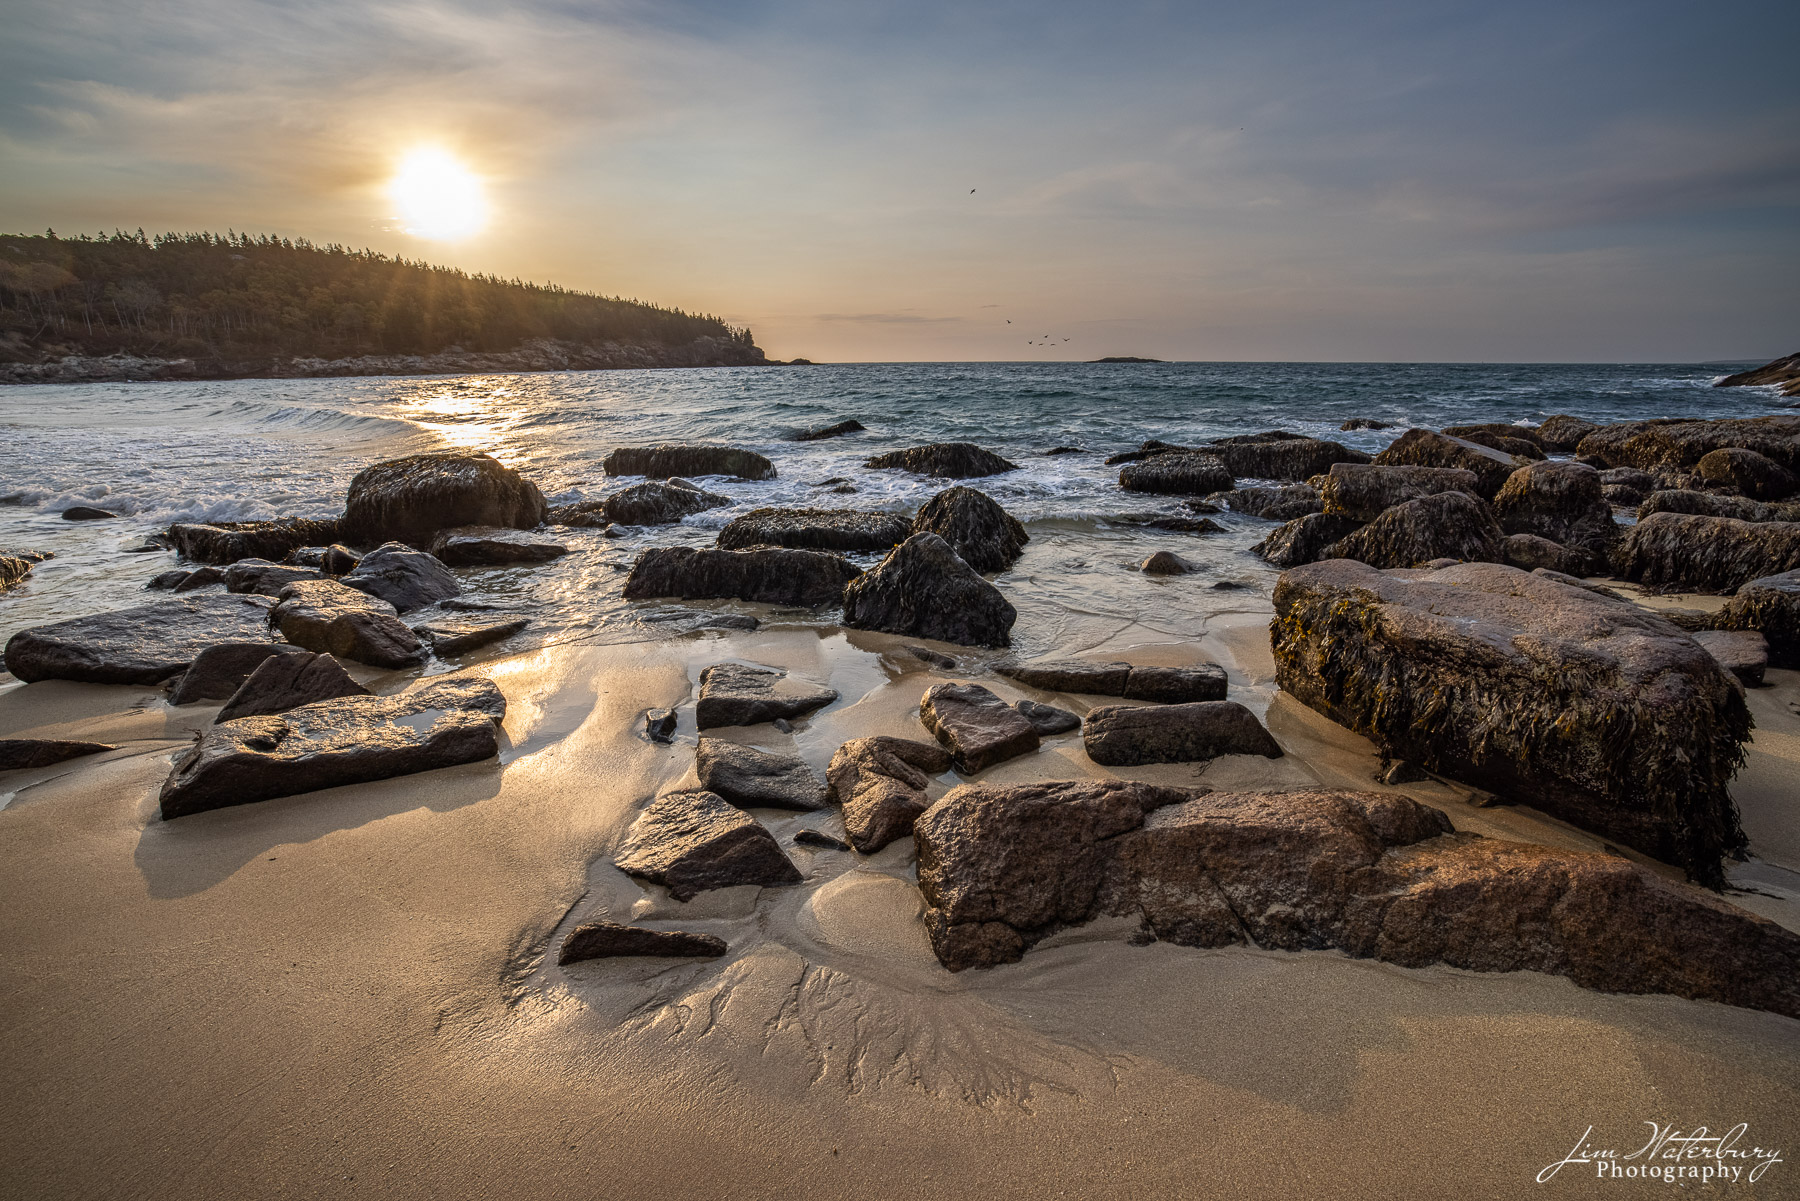 The sun rises on a quiet morning at Sand Beach in Acadia National Park, highlighting delicate fluvial patterns in the sand.